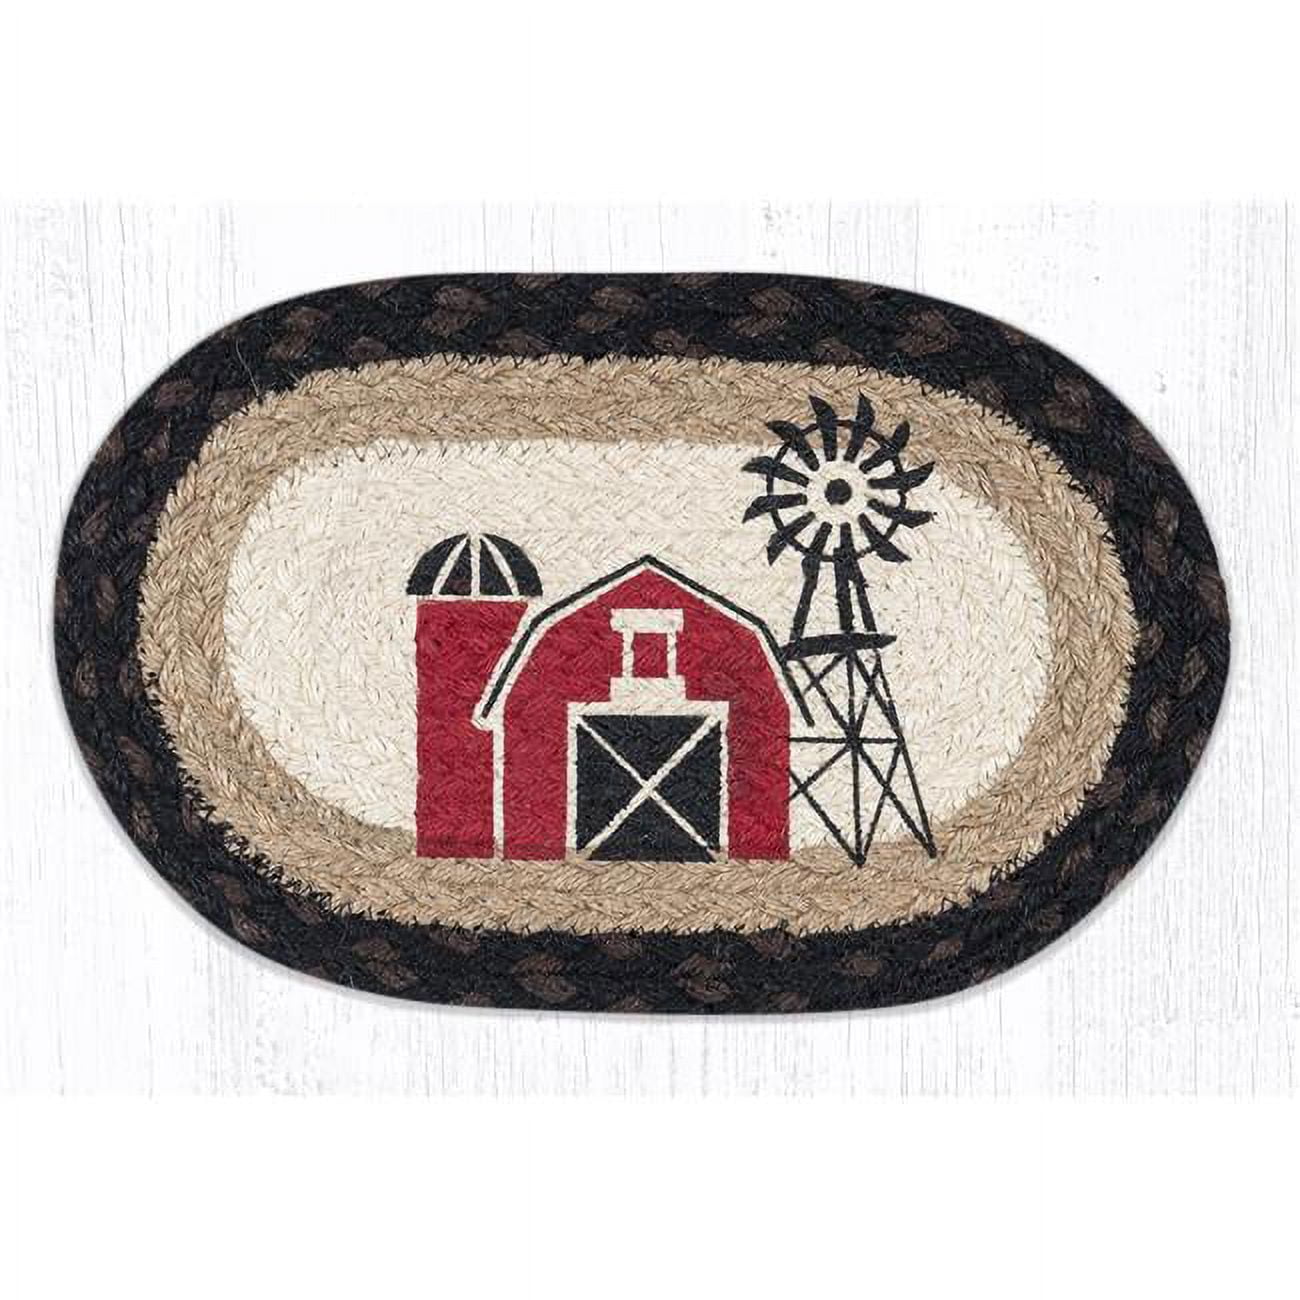 Capitol Importing 01-313w 7.5 X 11 In. Omsp-313 Windmill Printed Oval Swatch